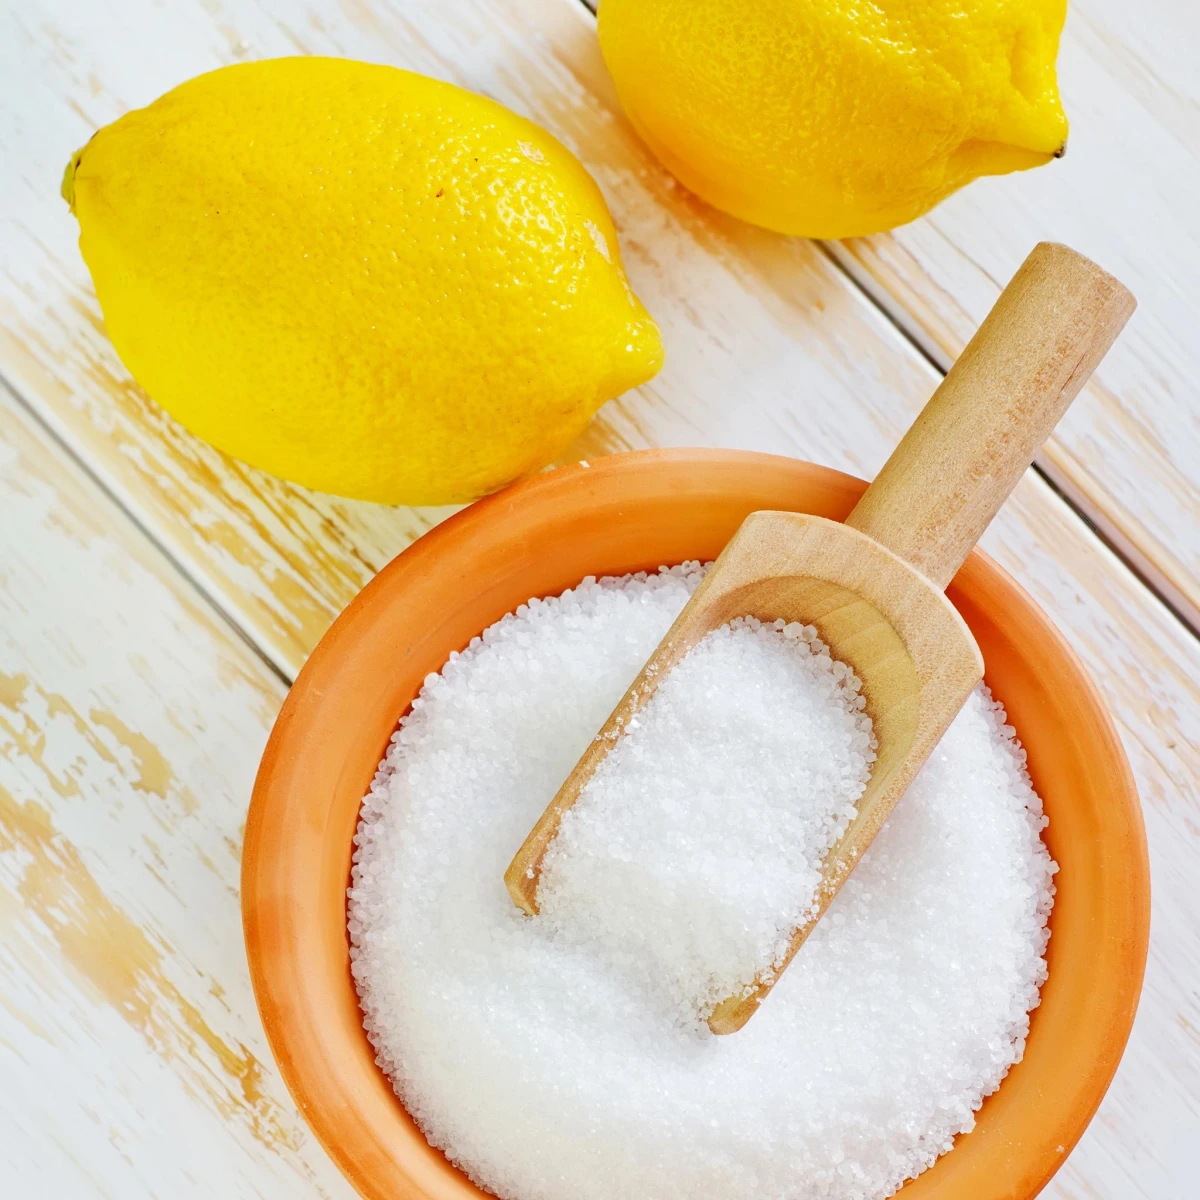 citric acid for cleaning citric acid and lemons